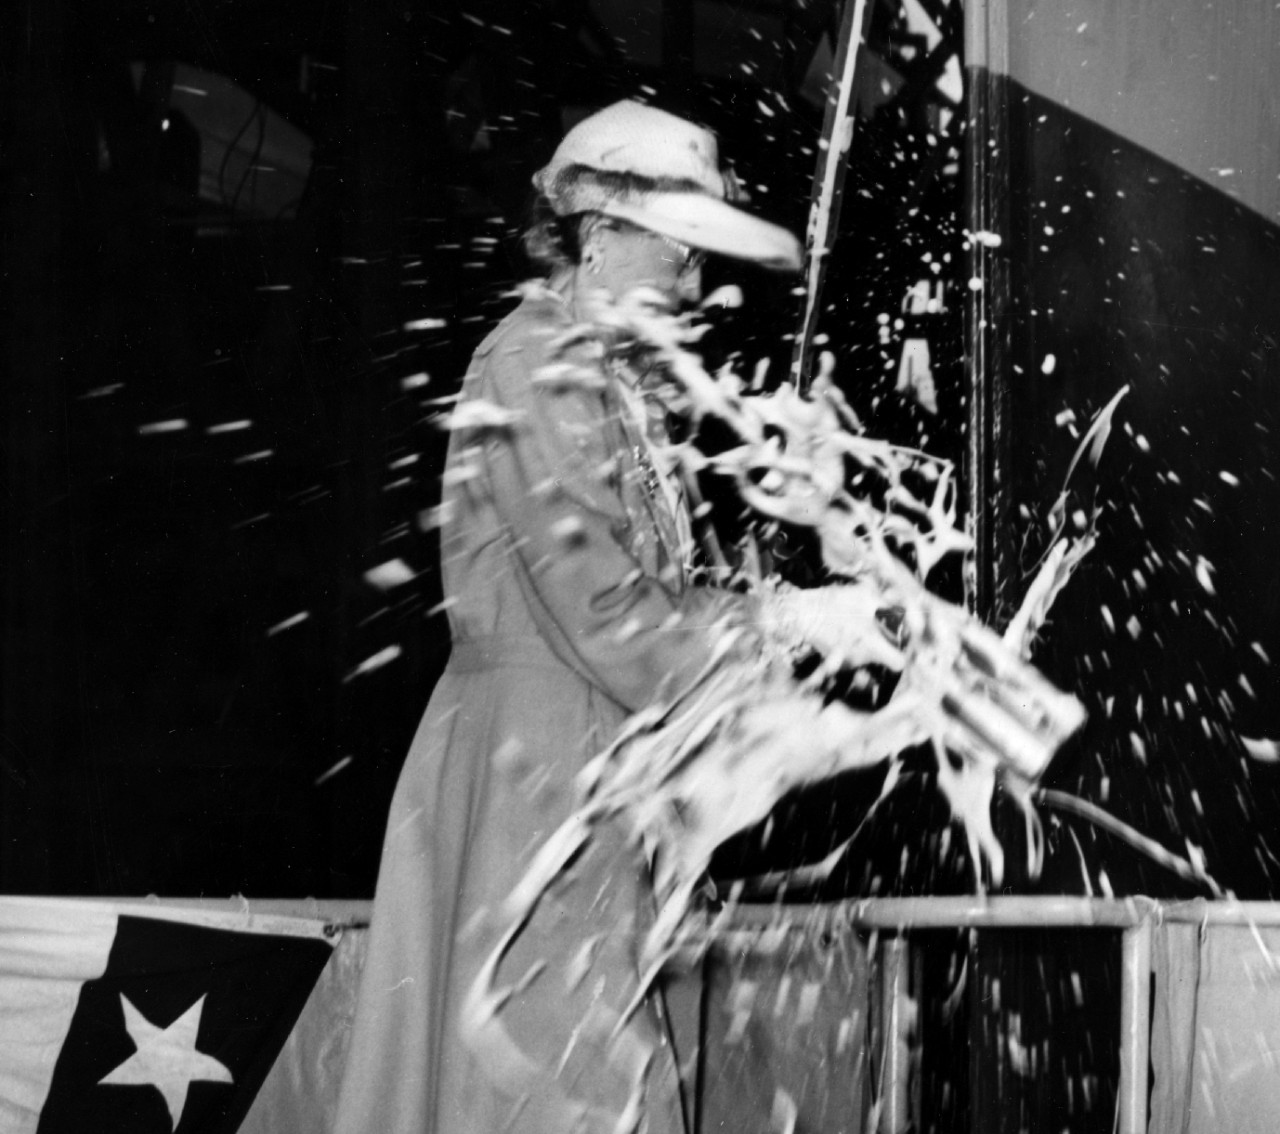 Coxswain Morrison’s daughter christens the destroyer named for her father on Independence Day 1944. (U.S. Navy Photograph 80-G-77842, National Archives and Records Administration, Still Pictures Division, College Park, Md.)